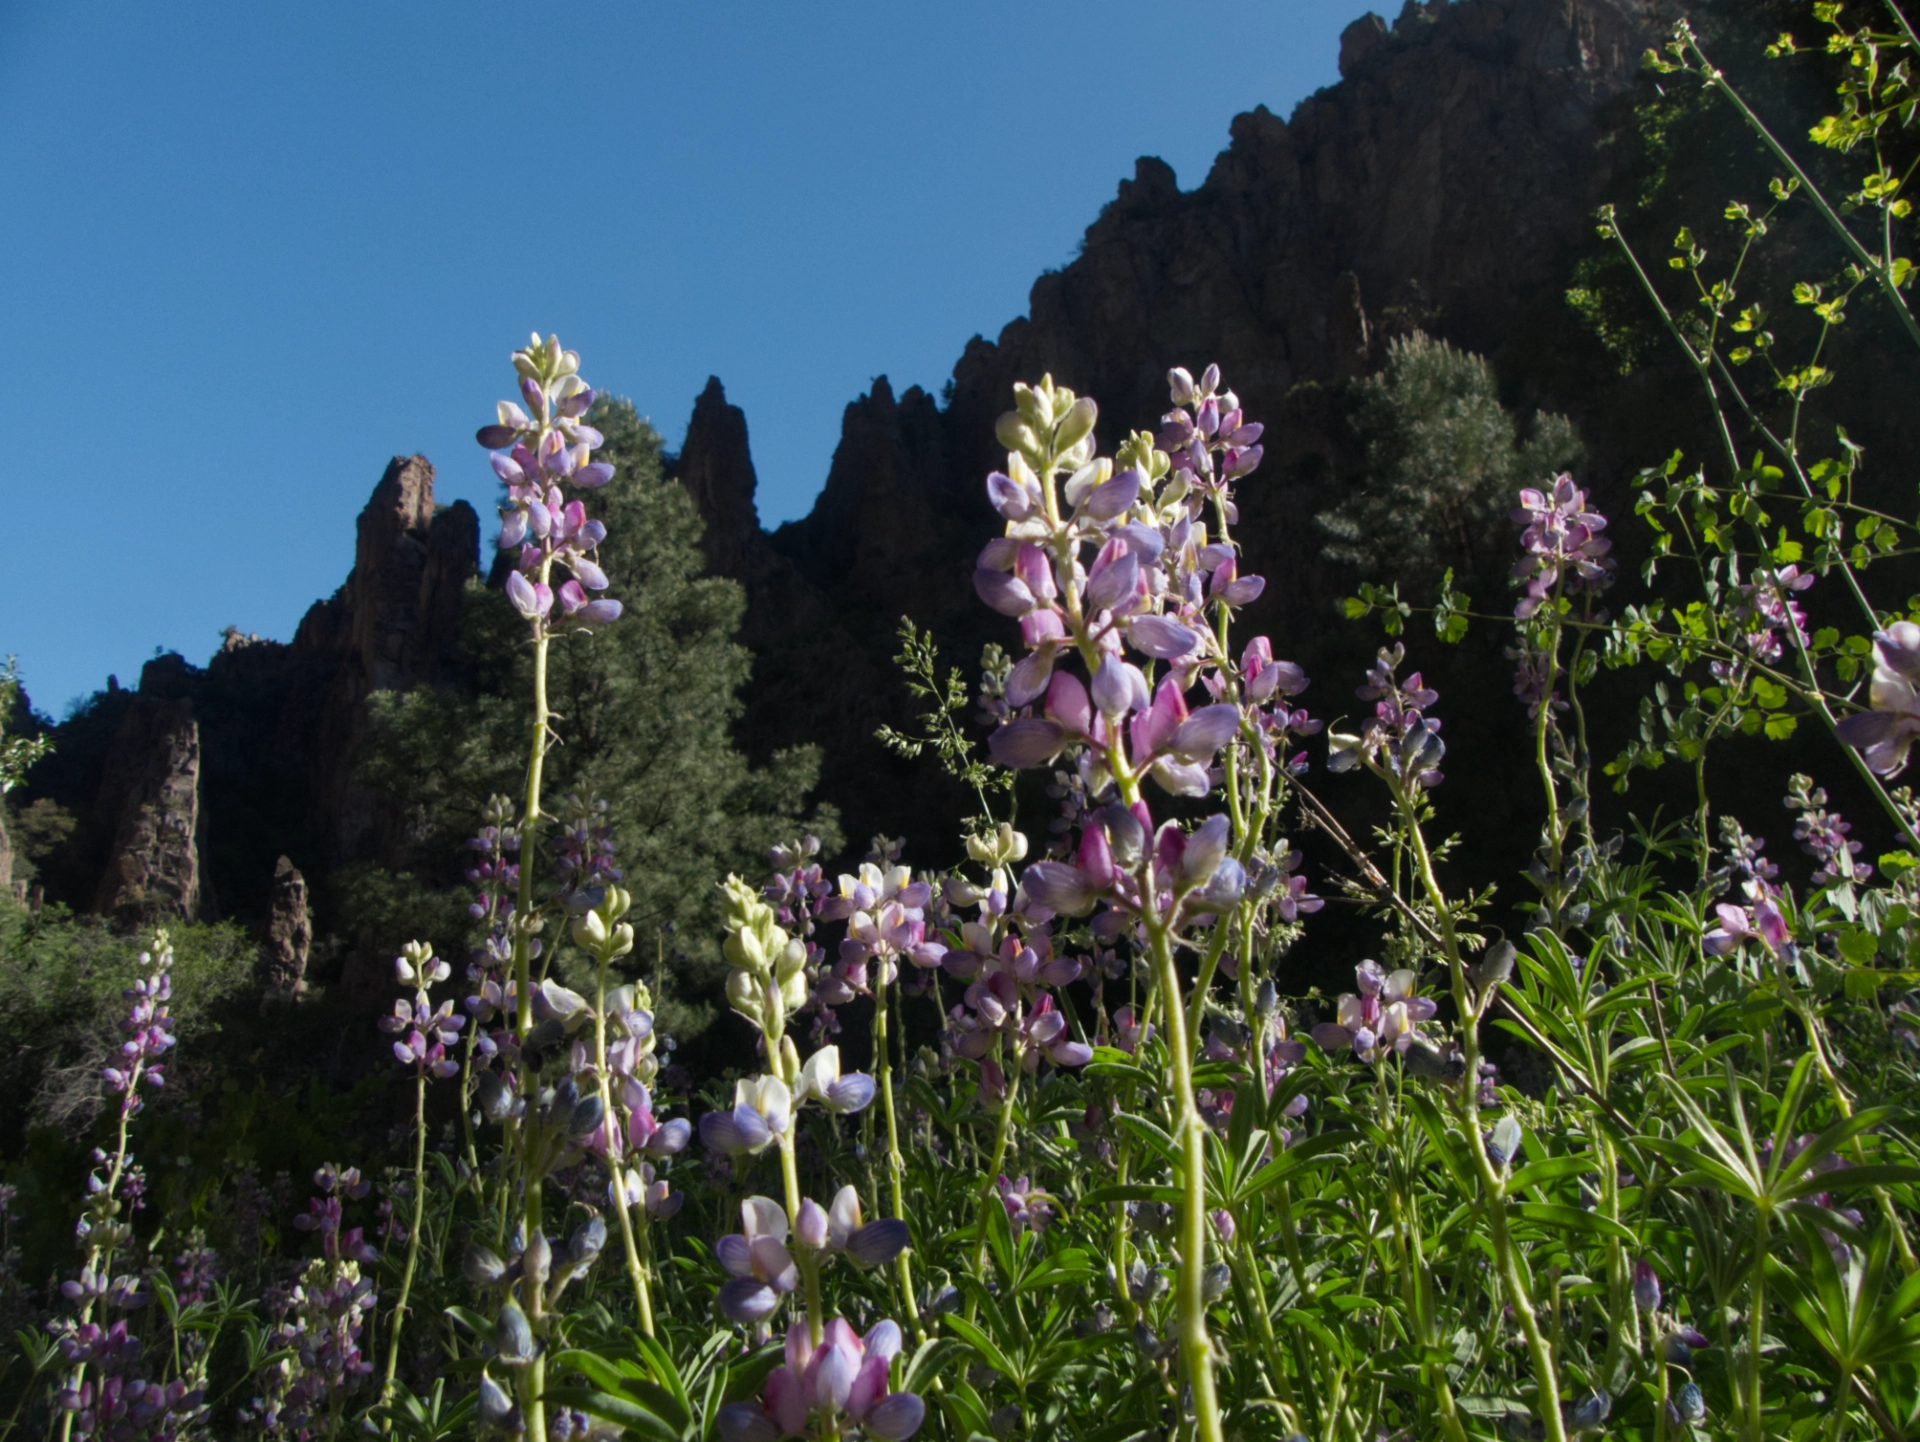 field of lupine with dark spires in the background